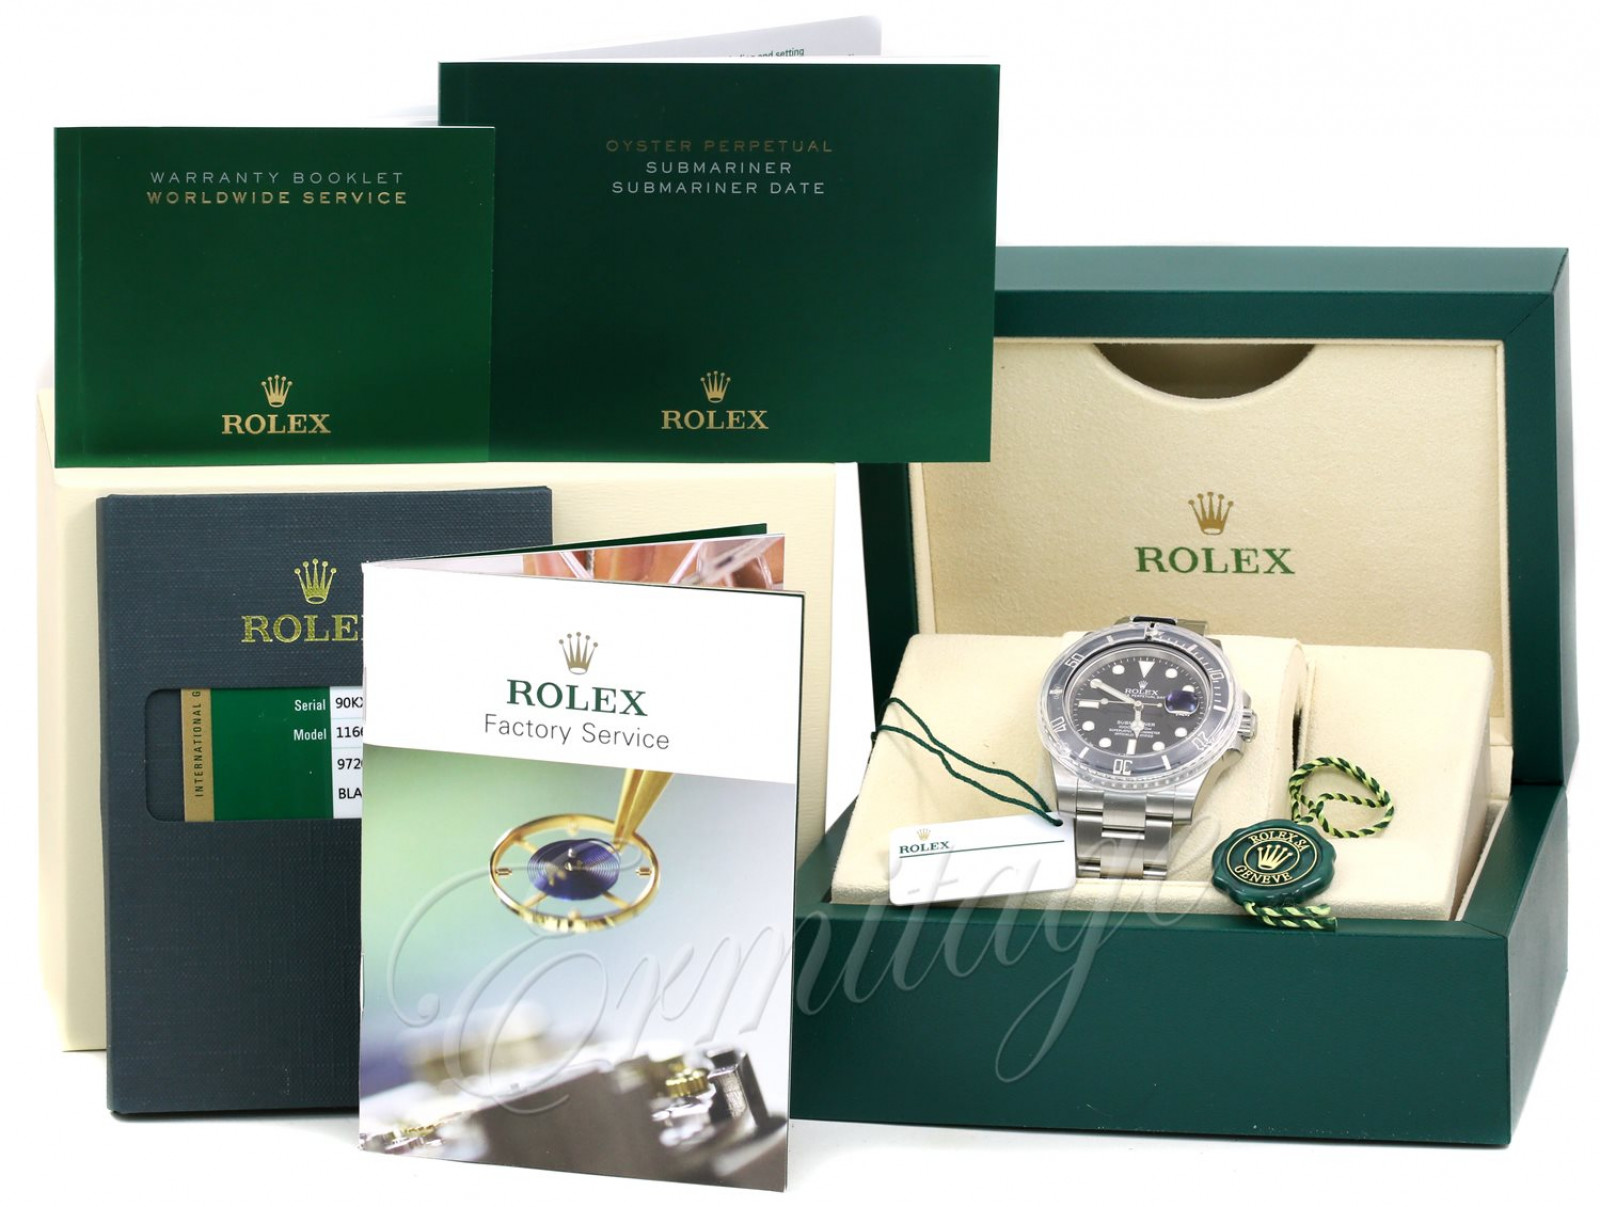 Sport Style Pre-Owned Rolex Submariner 116610